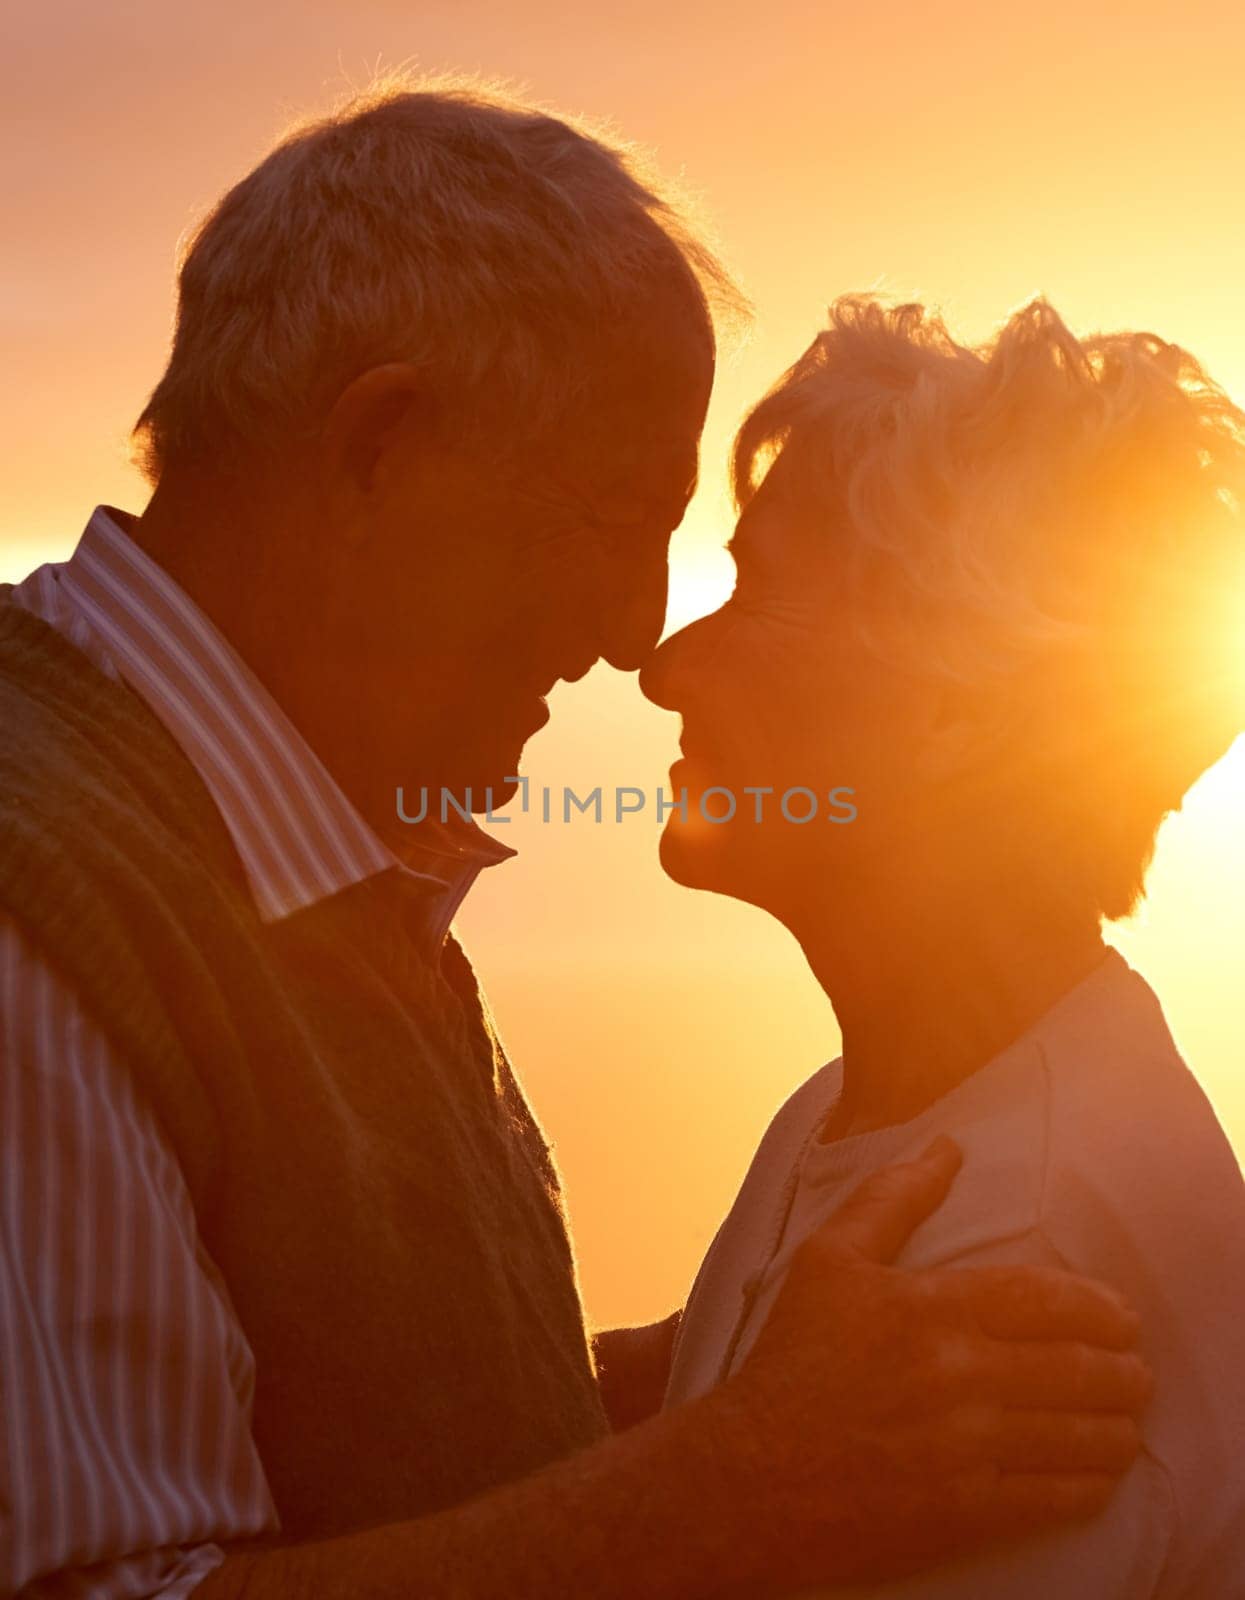 Sunset, elderly couple and embrace outdoor, love and bonding for connection together in nature. Man, woman and touch forehead for care, romance or support for commitment to relationship in retirement.